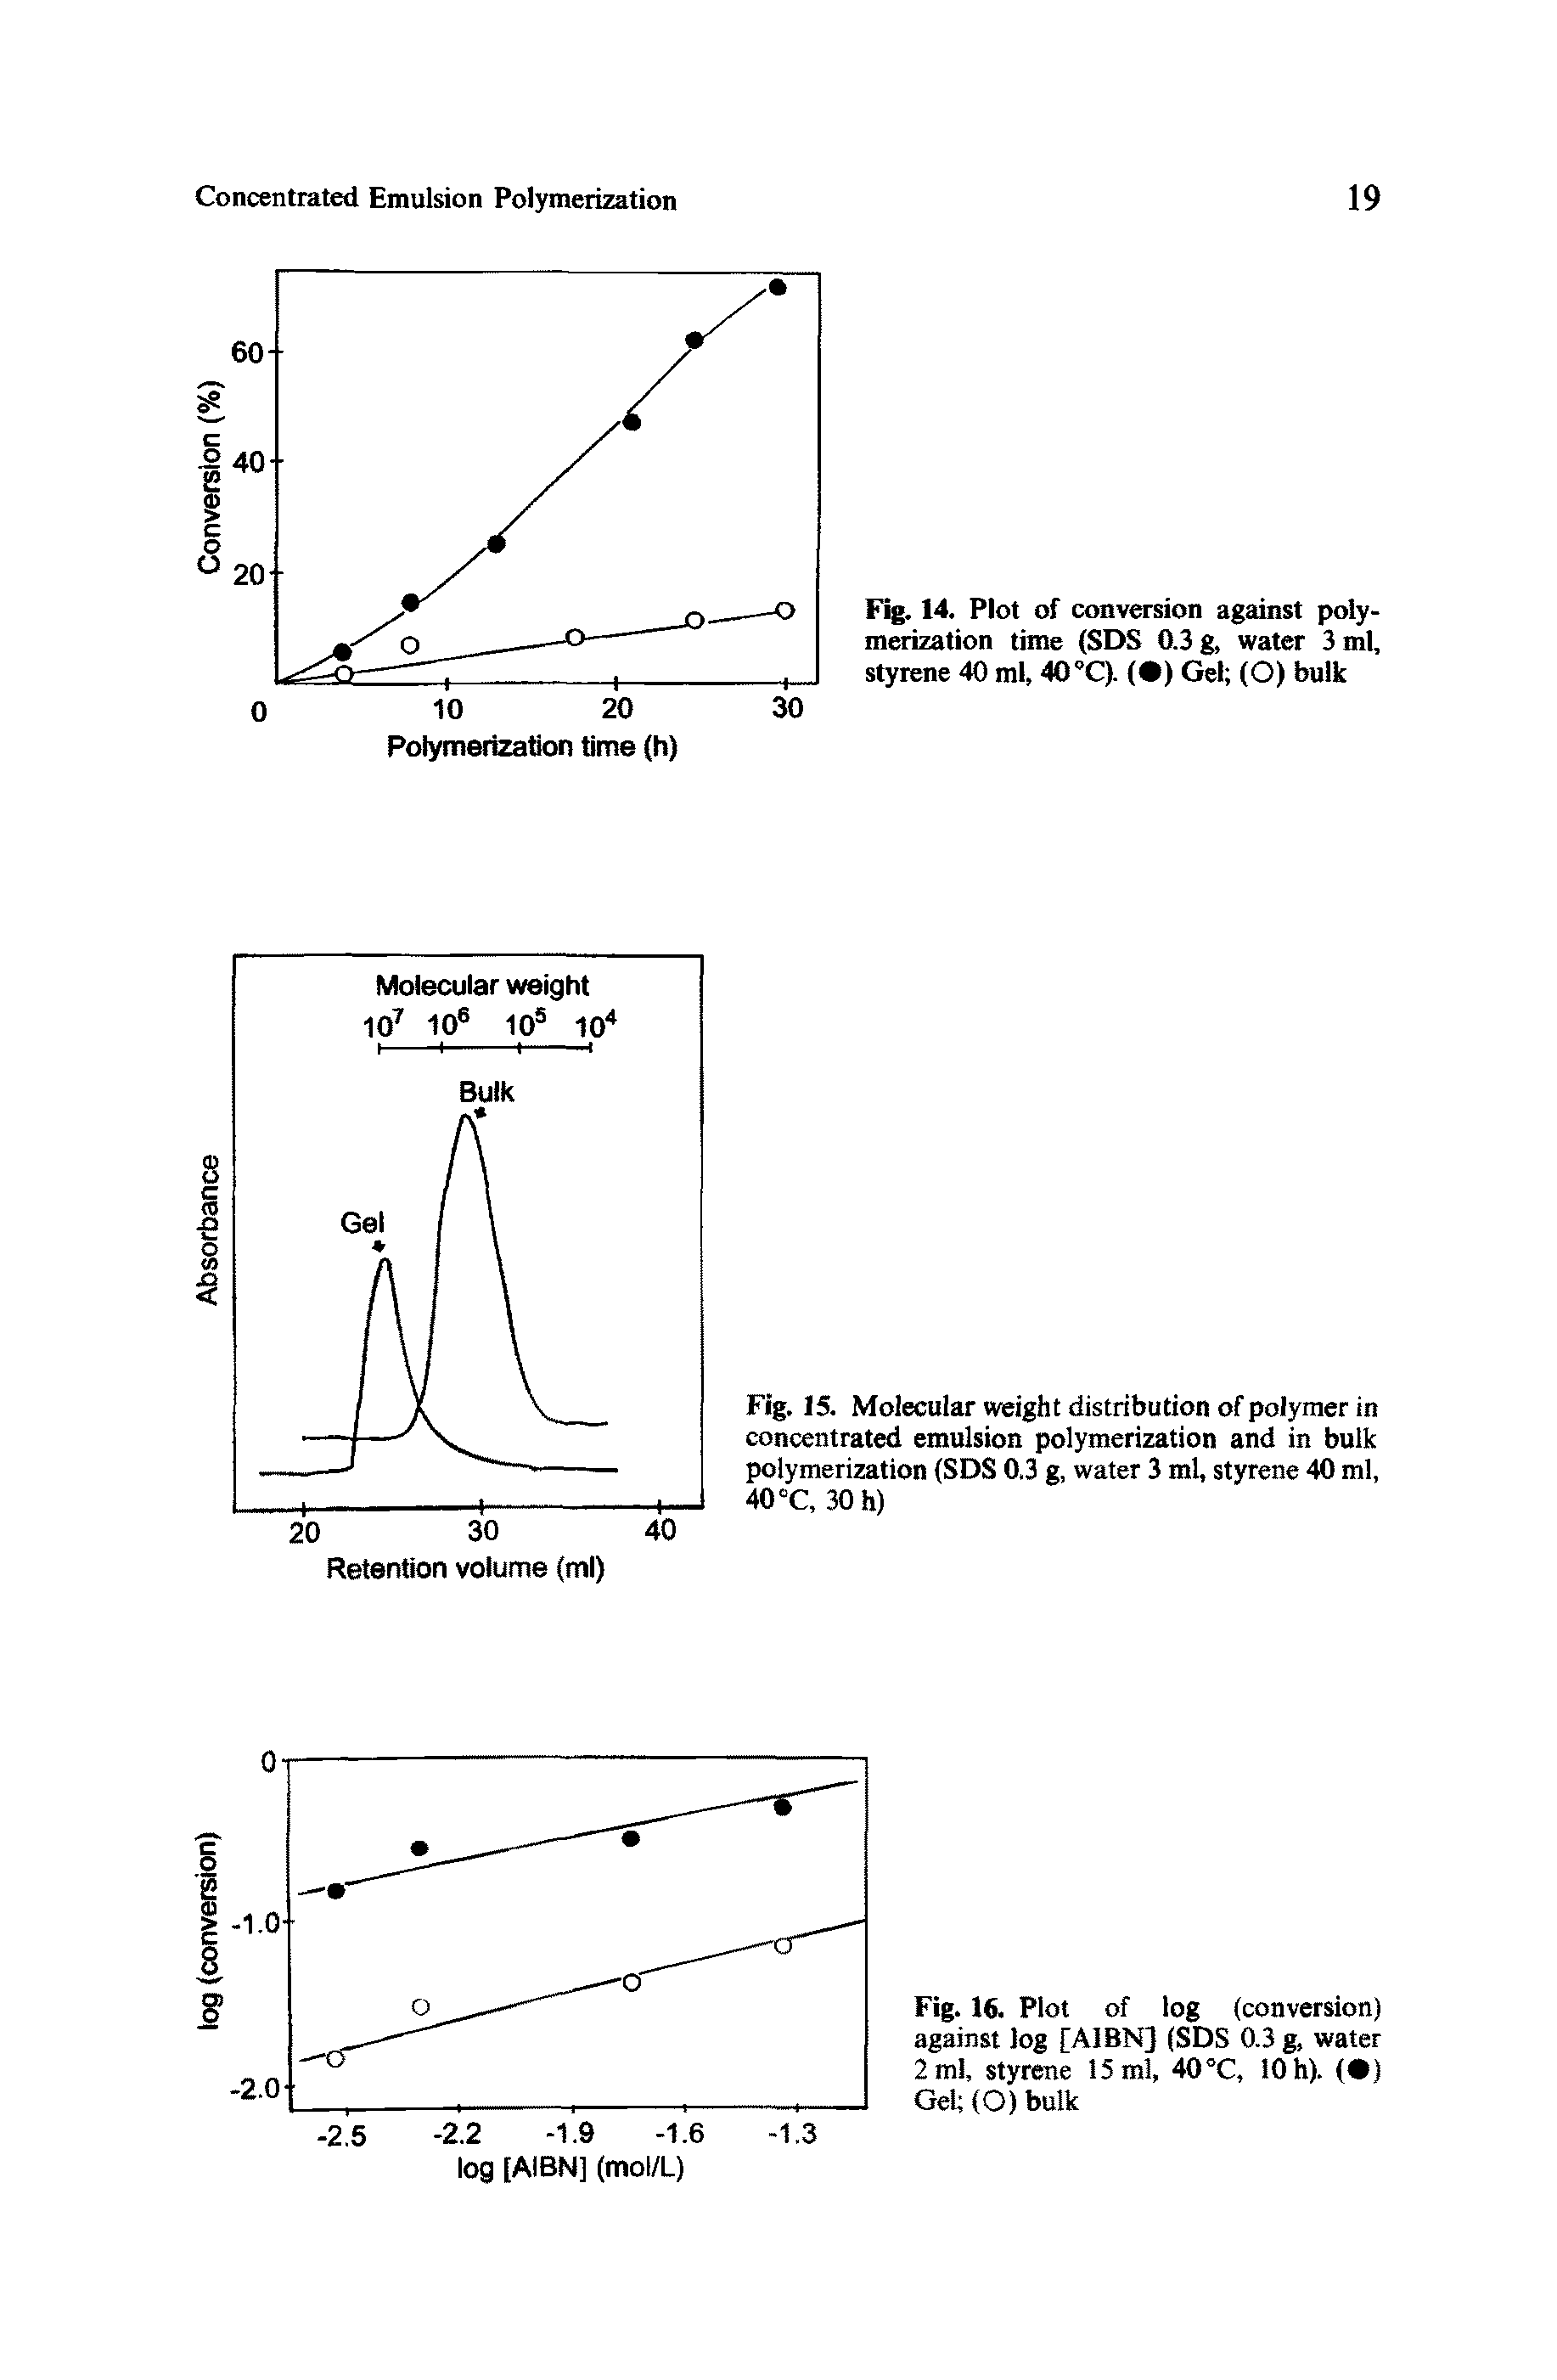 Fig. 15. Molecular weight distribution of polymer in concentrated emulsion polymerization and in bulk polymerization (SDS 0.3 g, water 3 ml, styrene 40 ml, 40 °C, 30 h)...